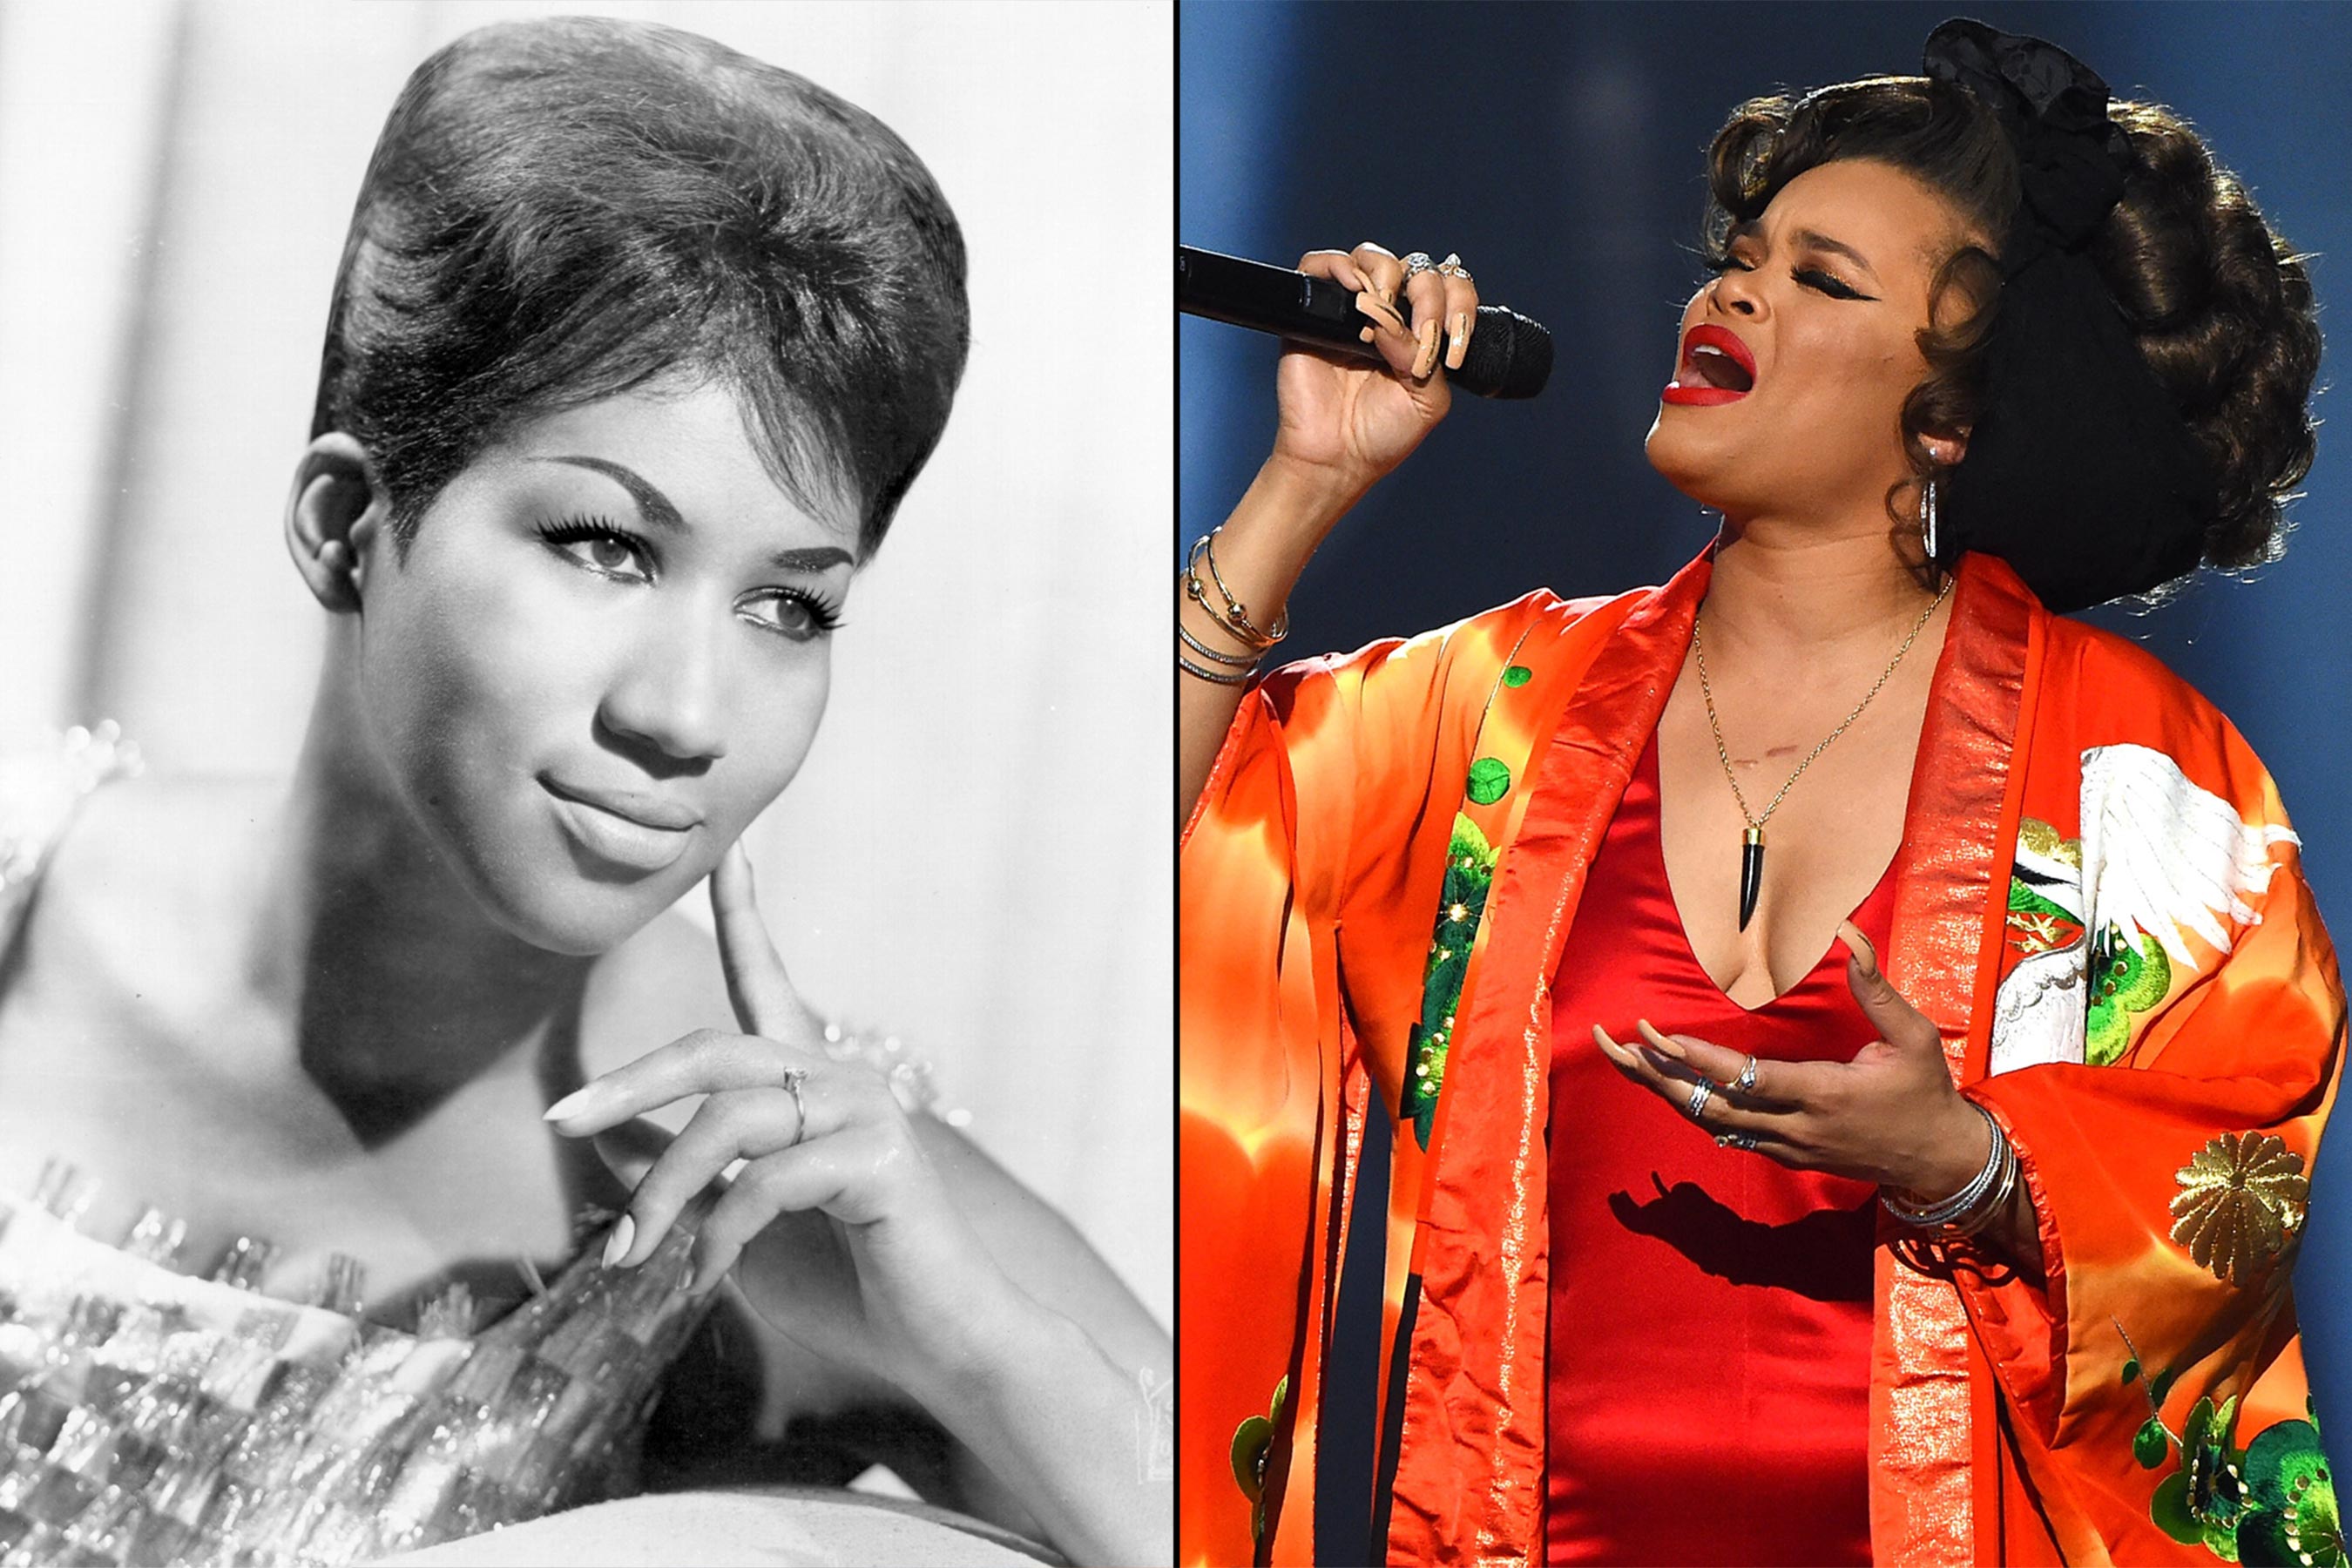 Paying 'R-E-S-P-E-C-T' To Aretha Franklin's 'Respect' 50 Years Later
